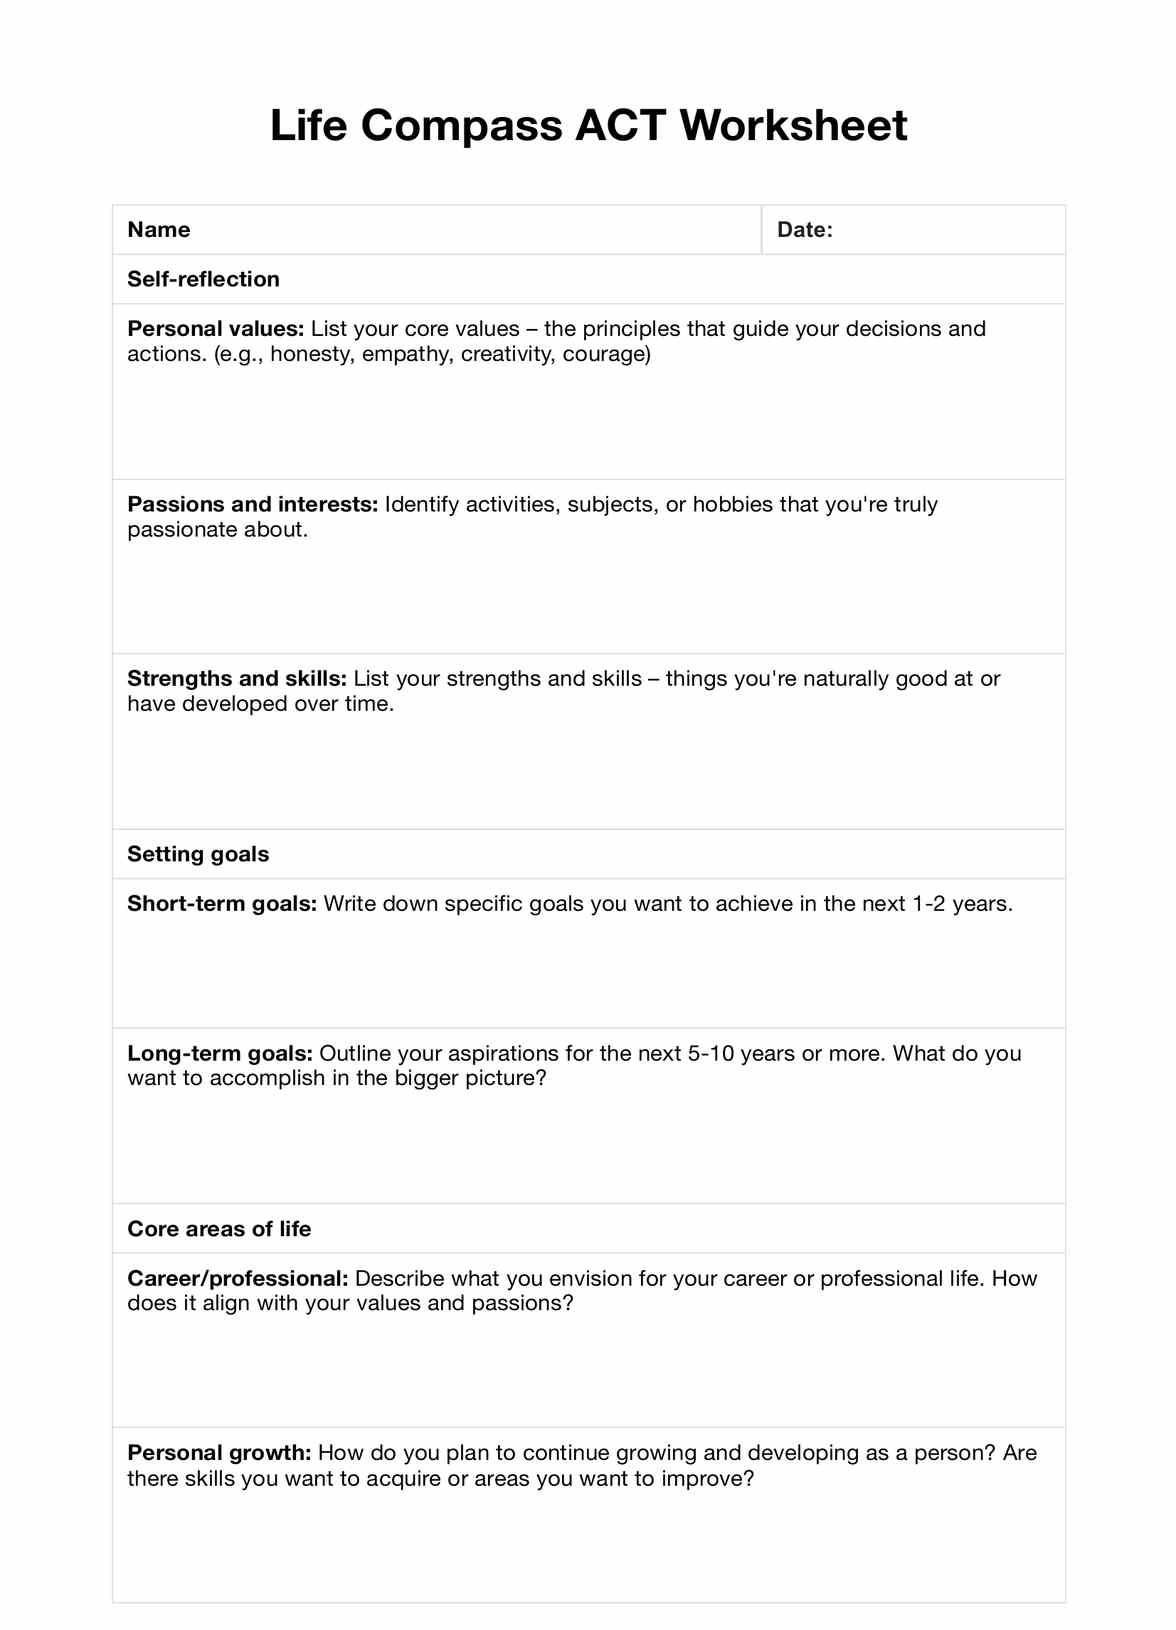 Life Compass ACT Worksheet PDF Example